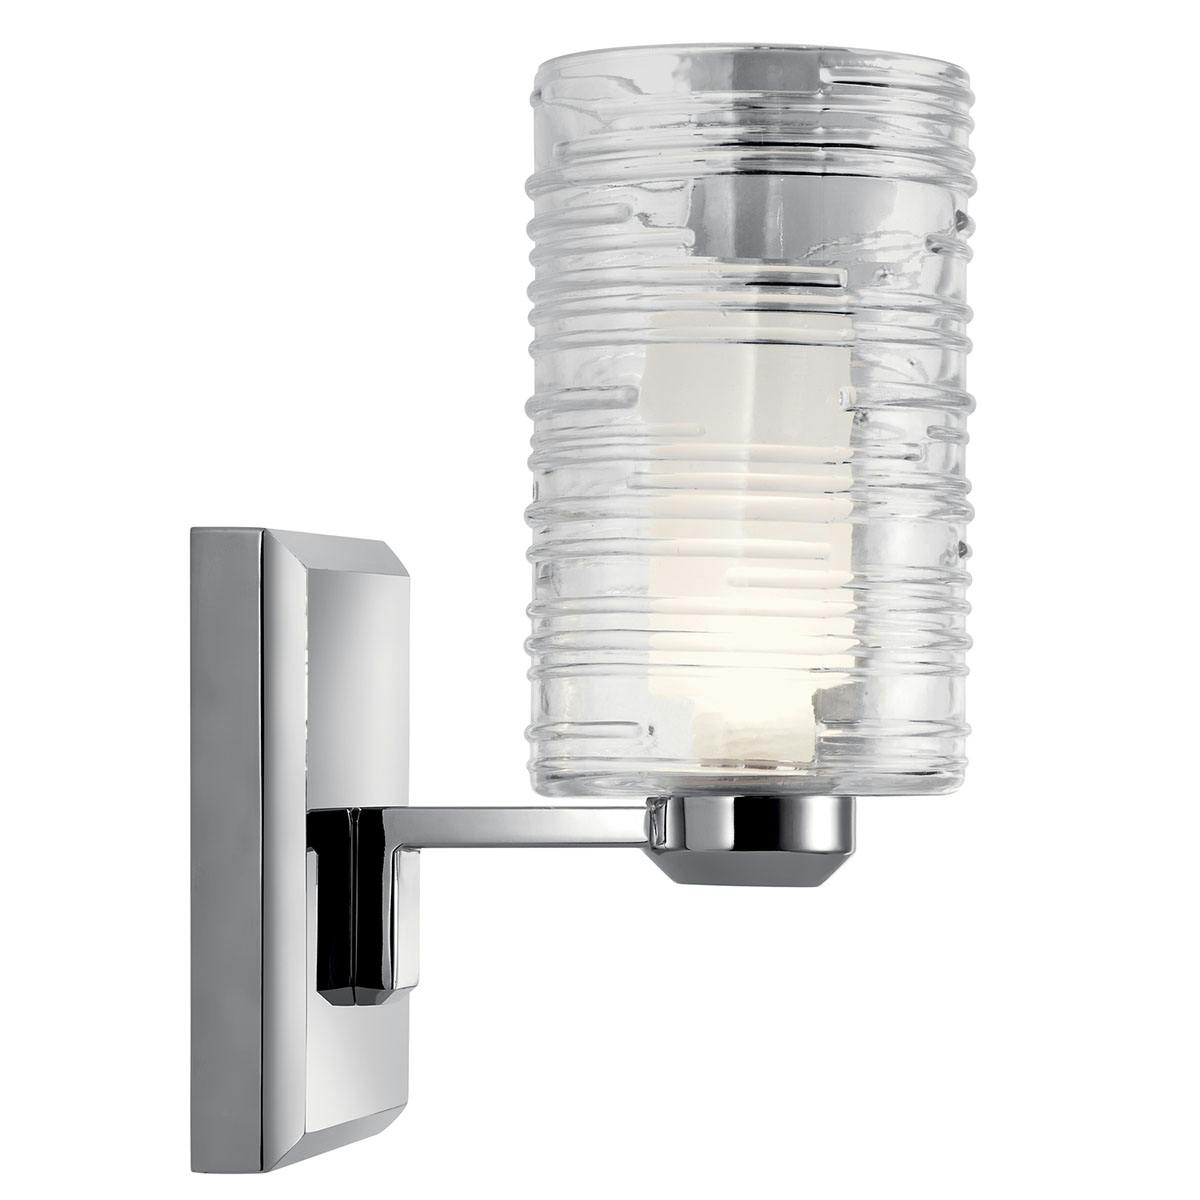 Profile view of the Giarosa™ 10" 1 Light Wall Sconce Chrome on a white background